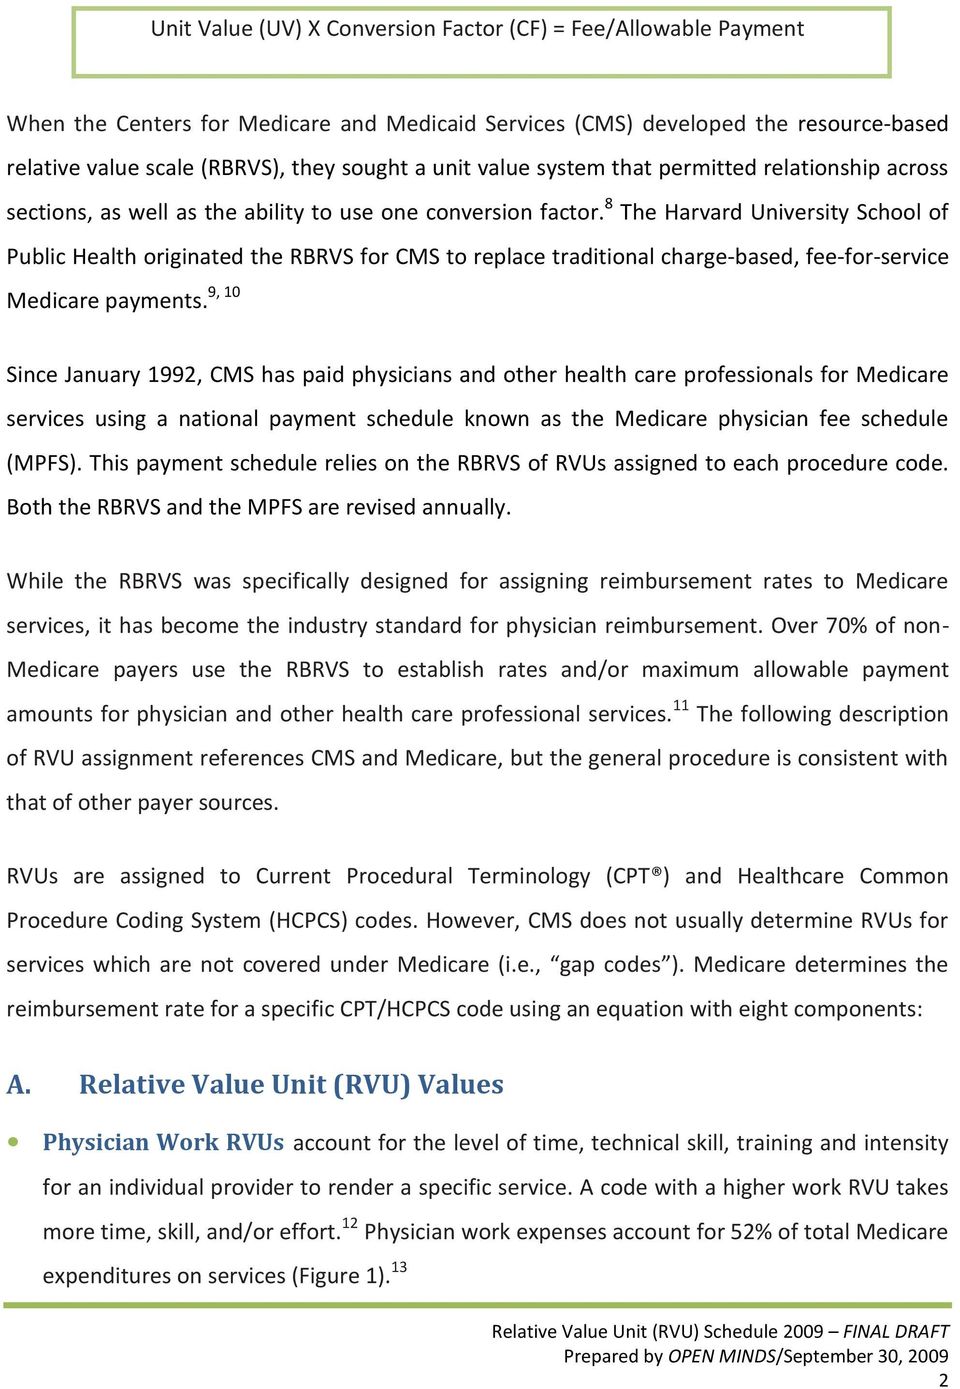 8 The Harvard University School of Public Health originated the RBRVS for CMS to replace traditional charge-based, fee-for-service 9, 10 Medicare payments.